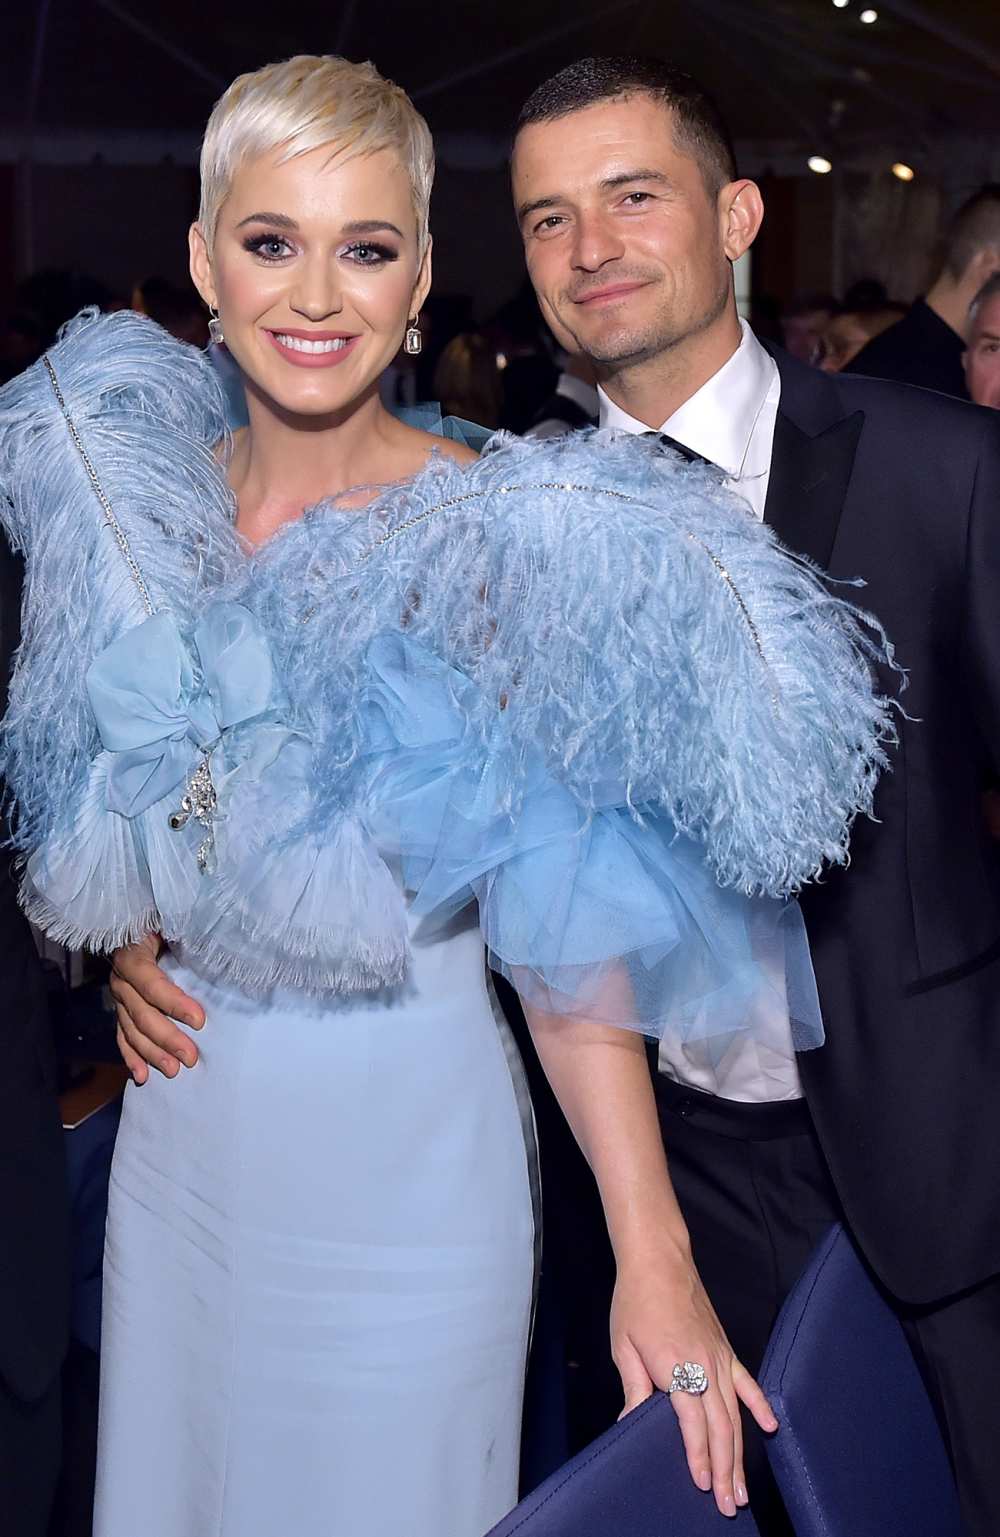 Katy Perry Wants to Improve ‘Emotionally’ With Fiance Orlando Bloom